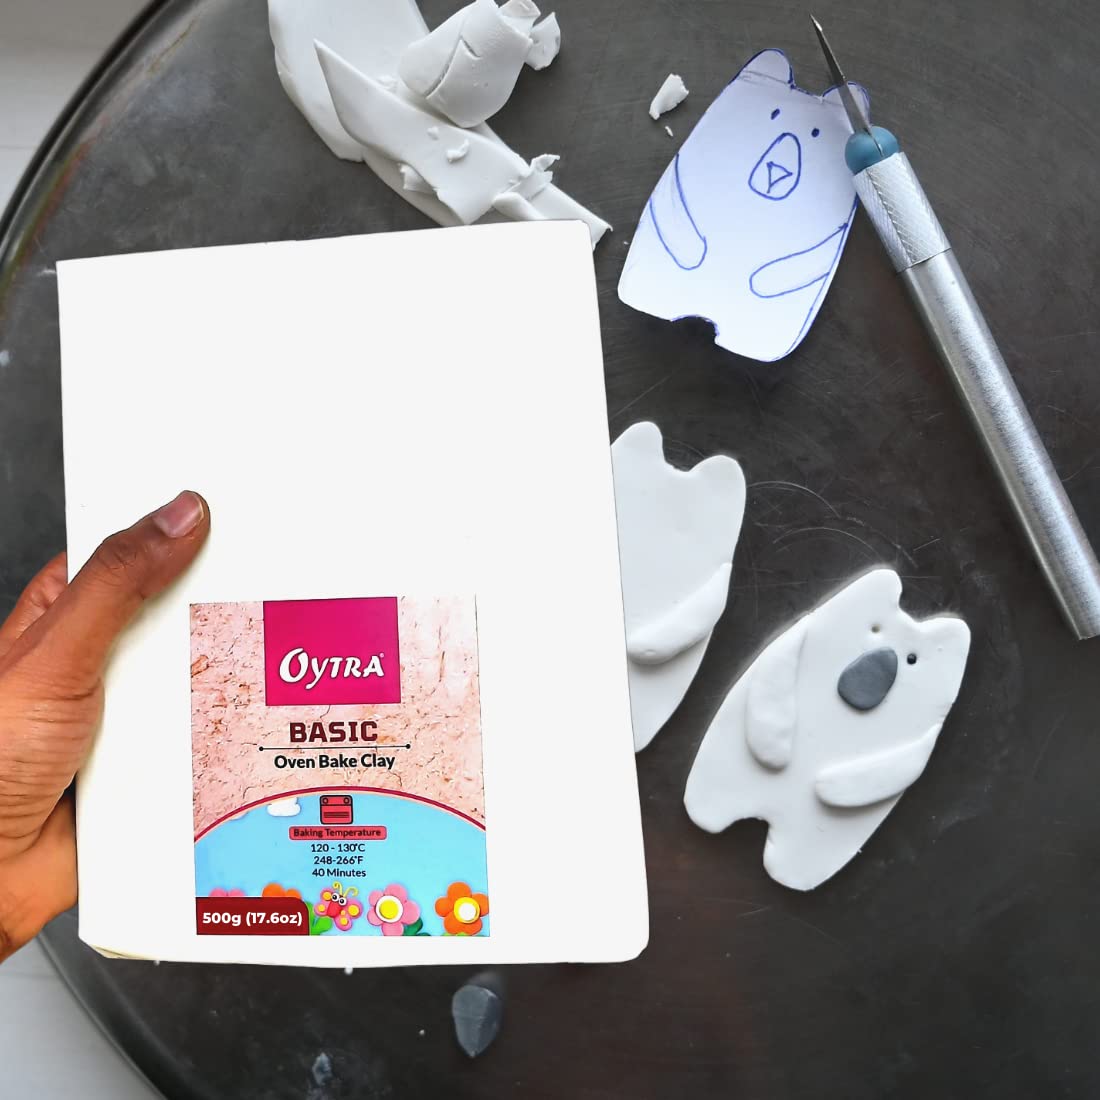 OYTRA White Polymer Clay 1 KG Art Clay Price in India - Buy OYTRA White  Polymer Clay 1 KG Art Clay online at